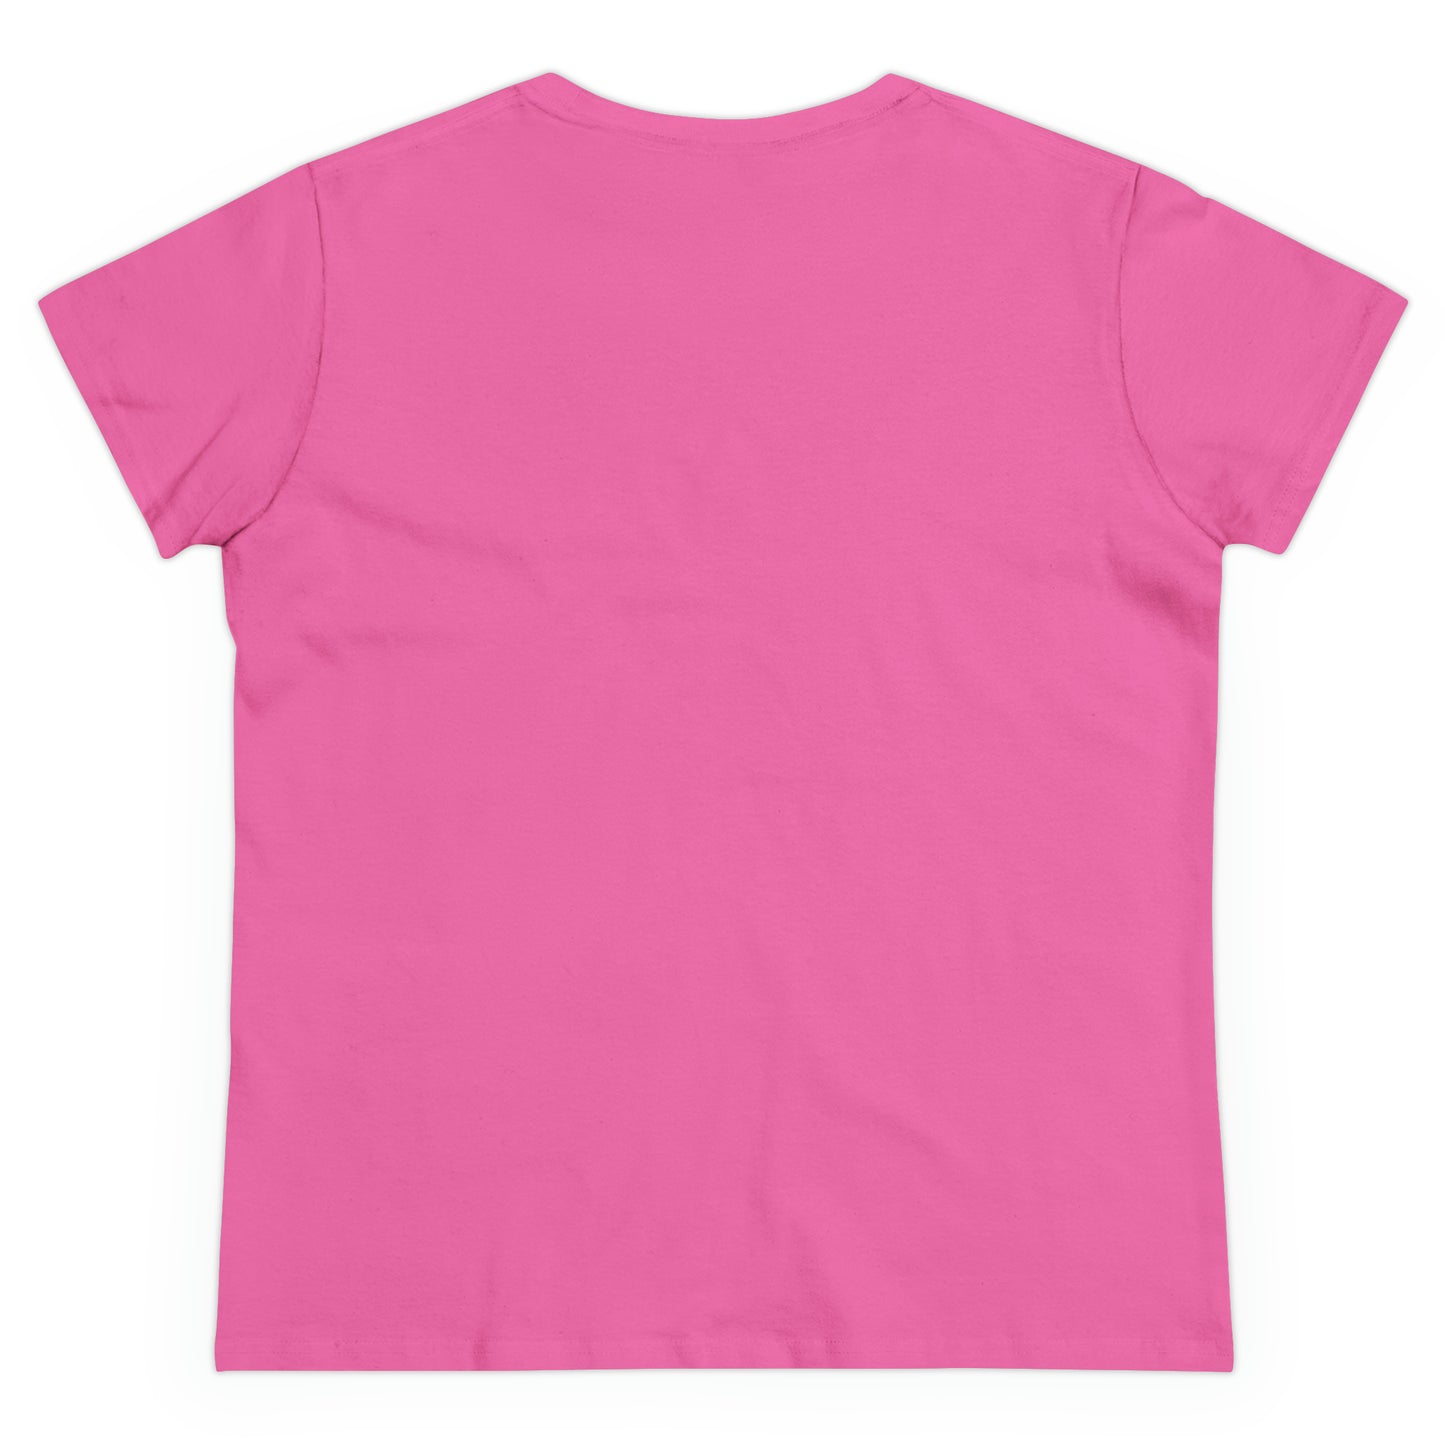 Rise Biscuit Doll T-Shirt - Pink